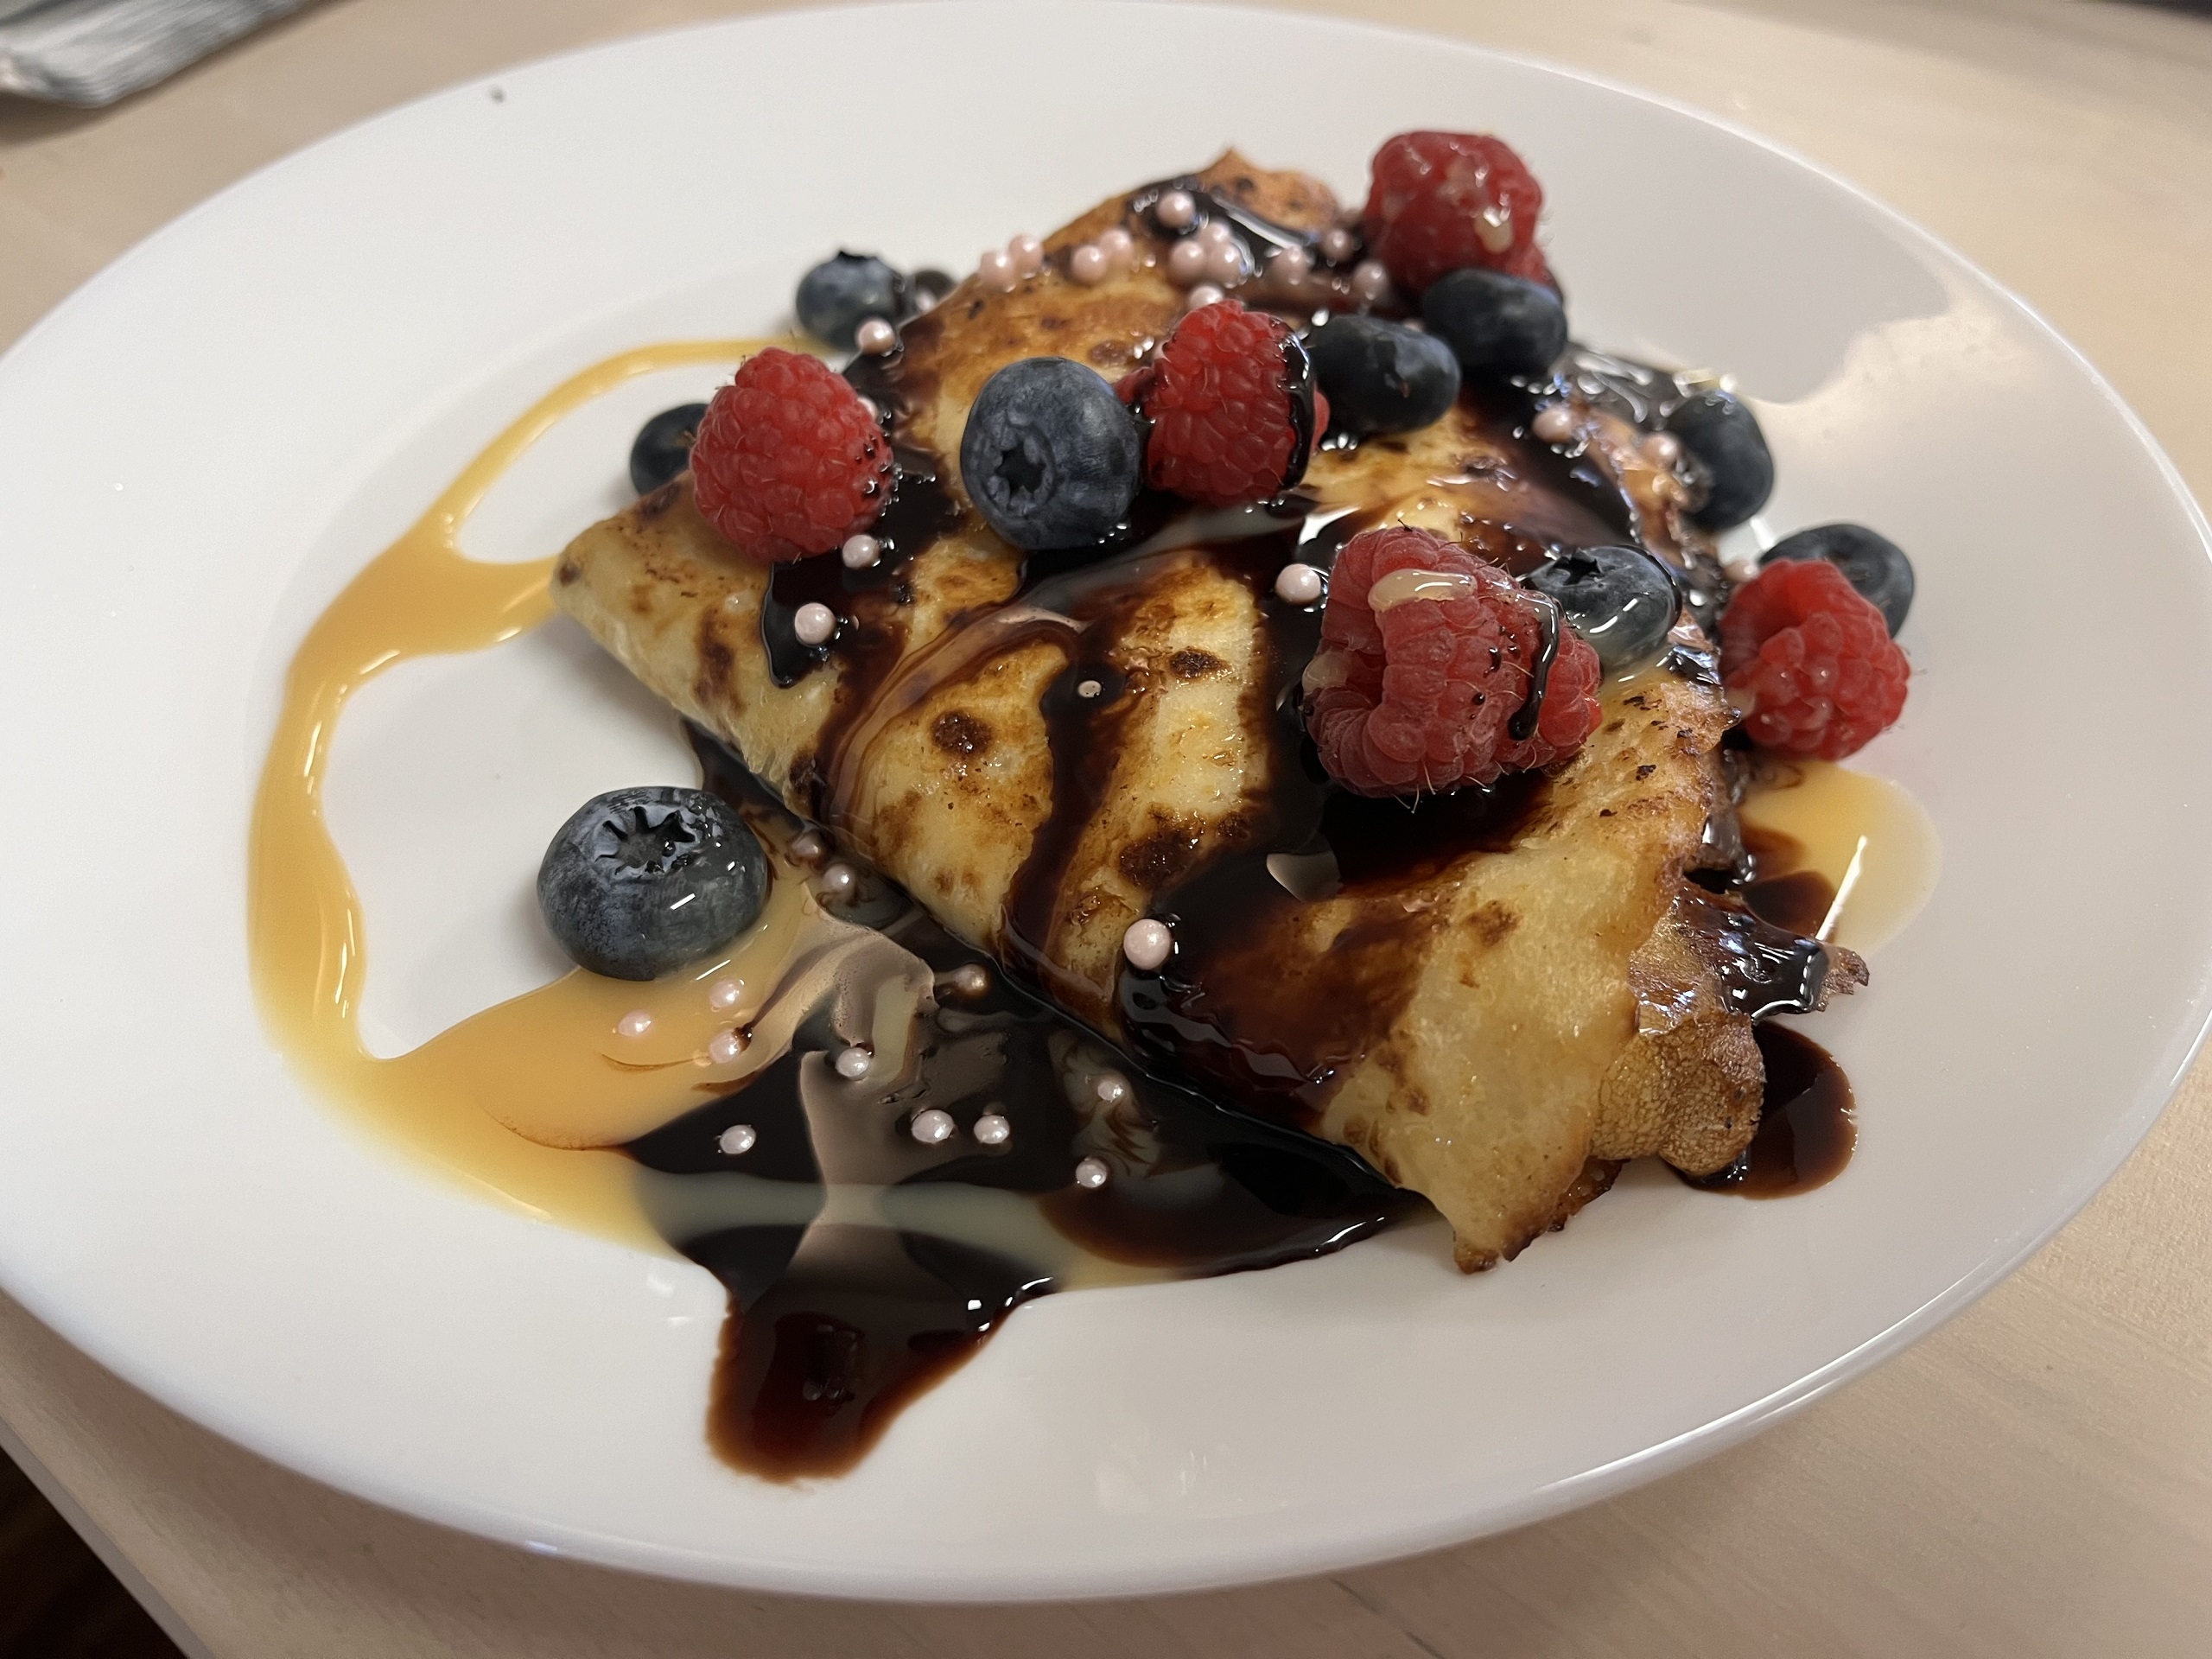 Kat's sweet cheese blintzes topped with blueberries, rasberries, and edible sugar pearls, and homemade chocolate sauce on a white plate on an ash wood table.